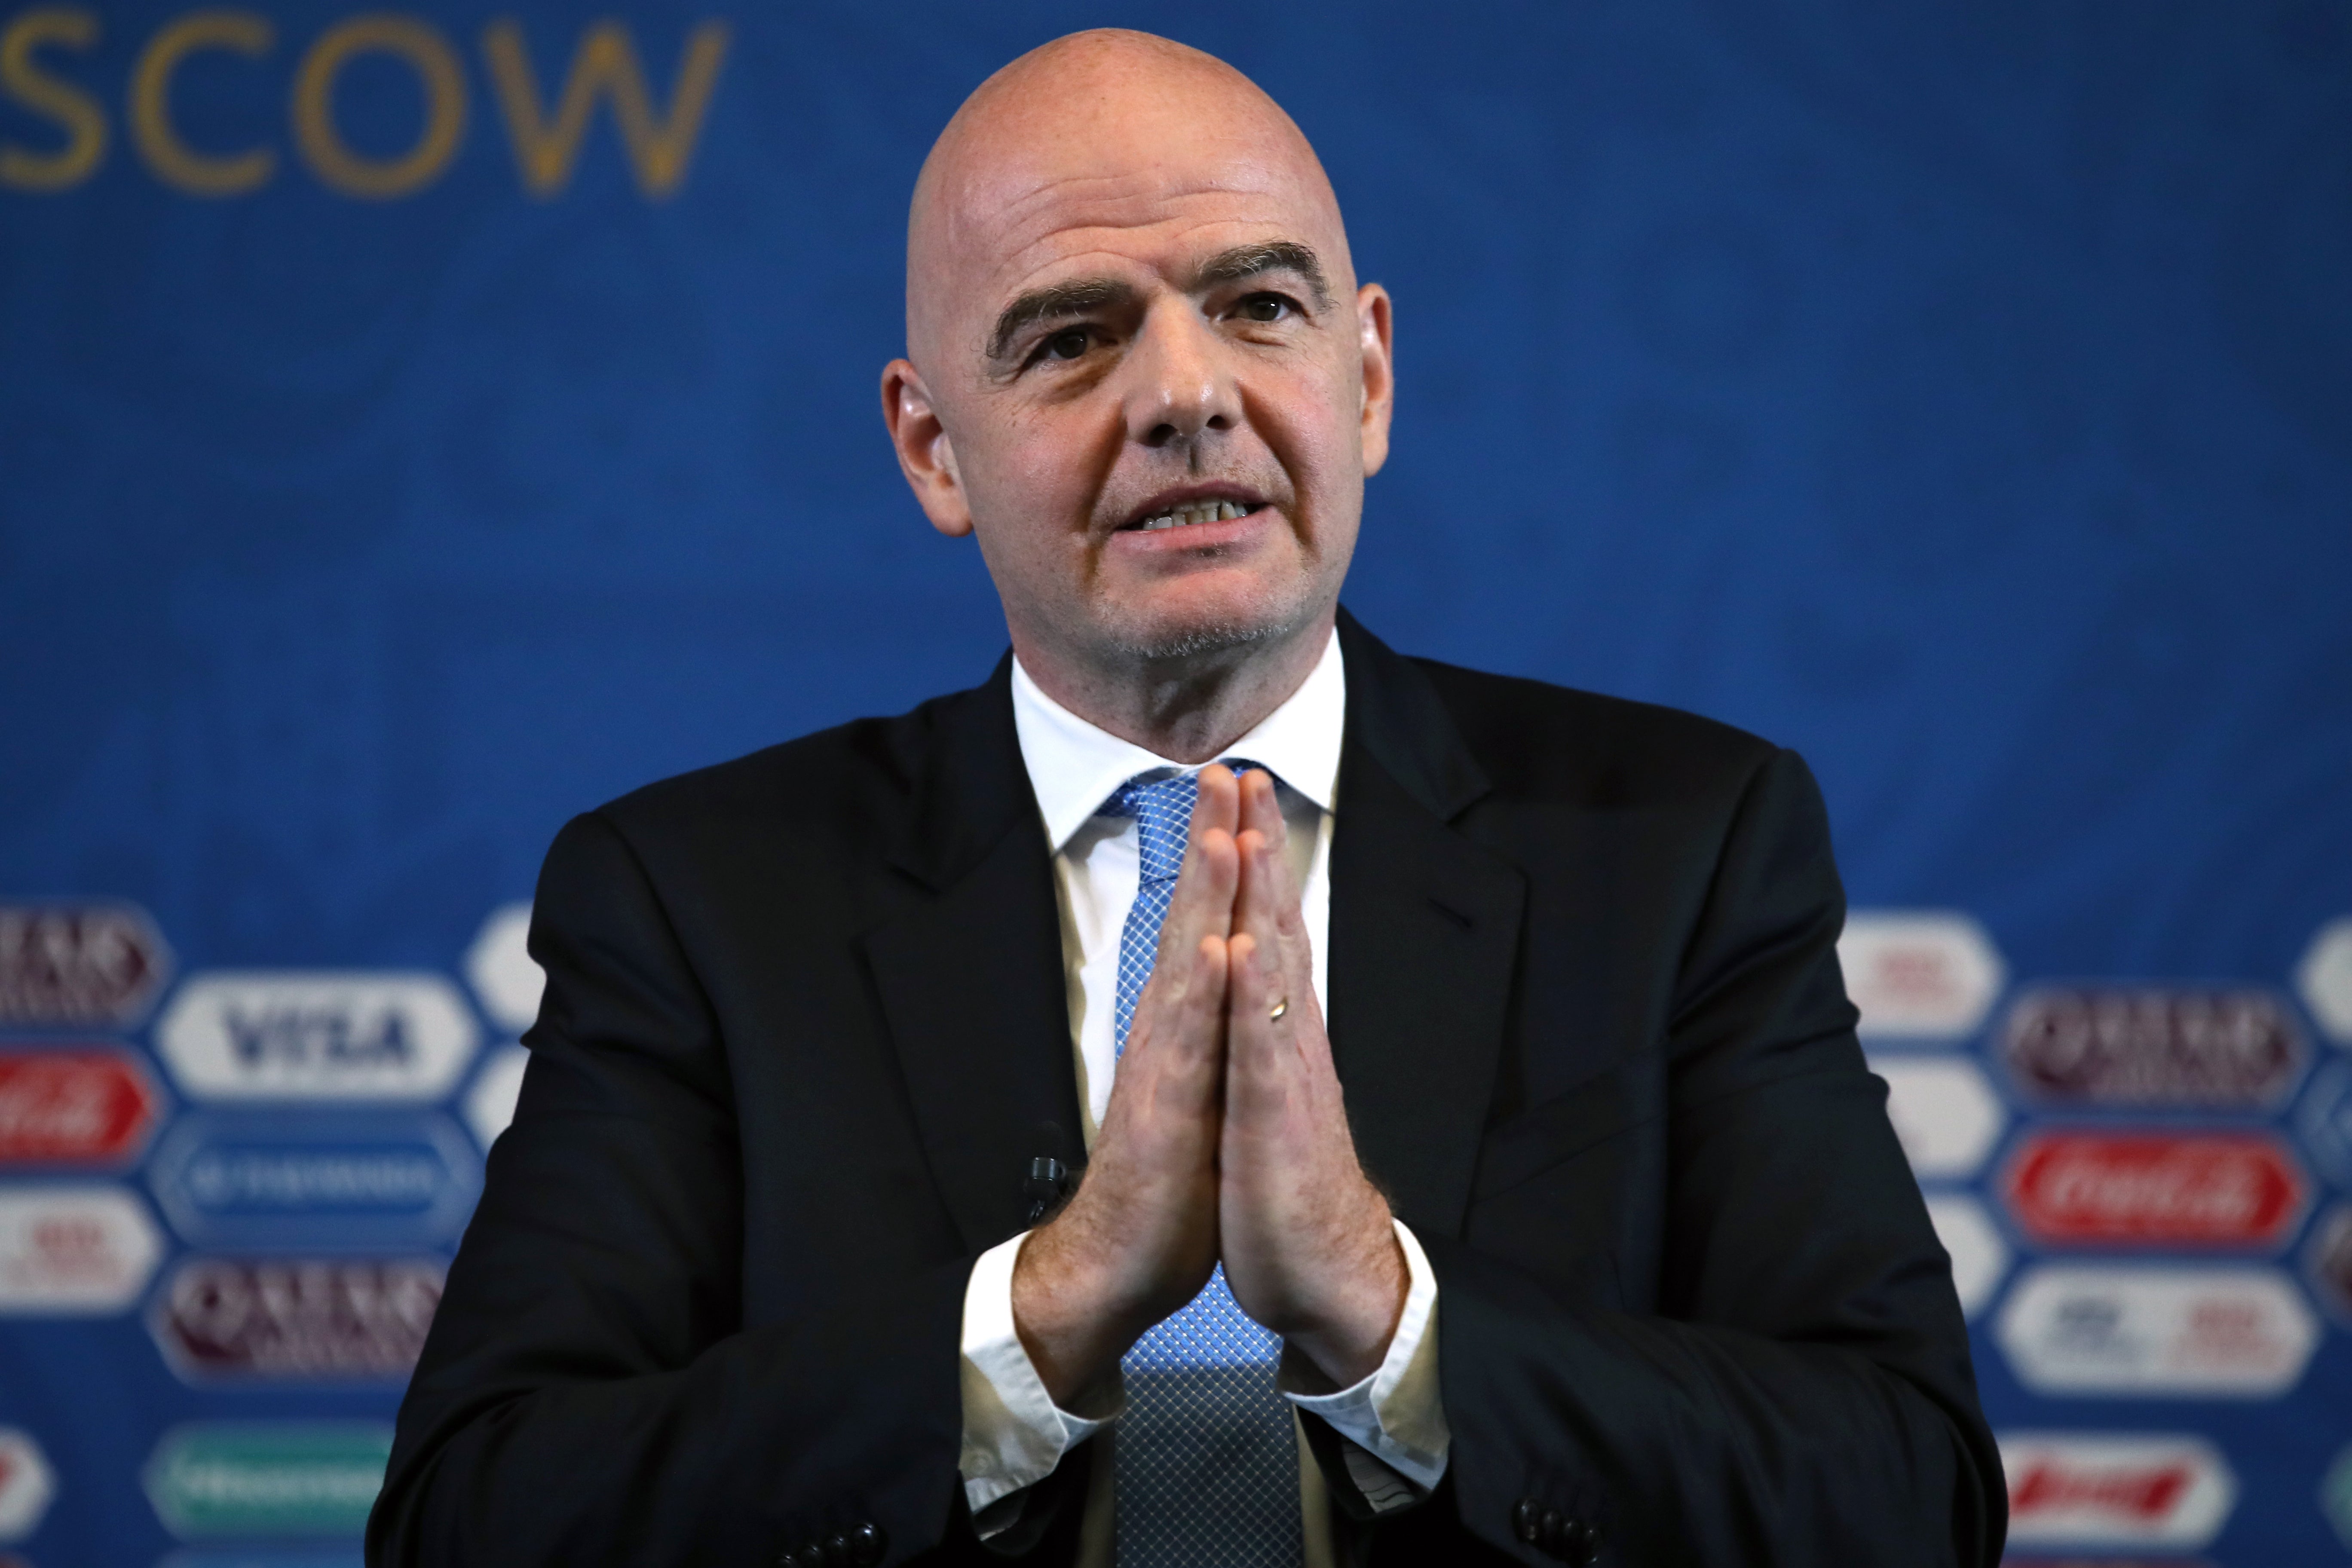 FIFA president Gianni Infantino applauded player protests linked to the BLM movement last summer (PA)